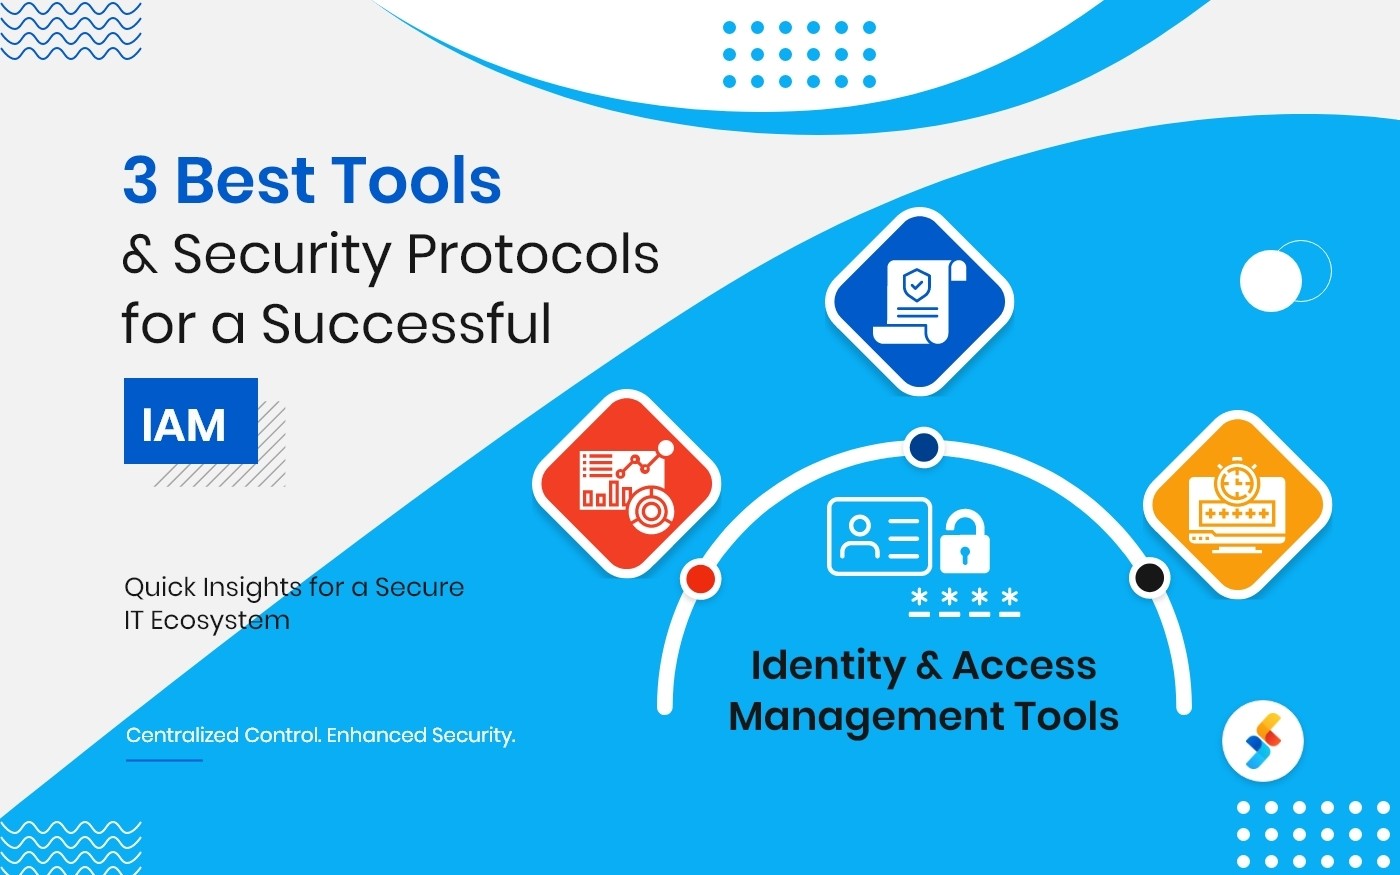 3 Best Tools and Security Protocols for a Successful IAM